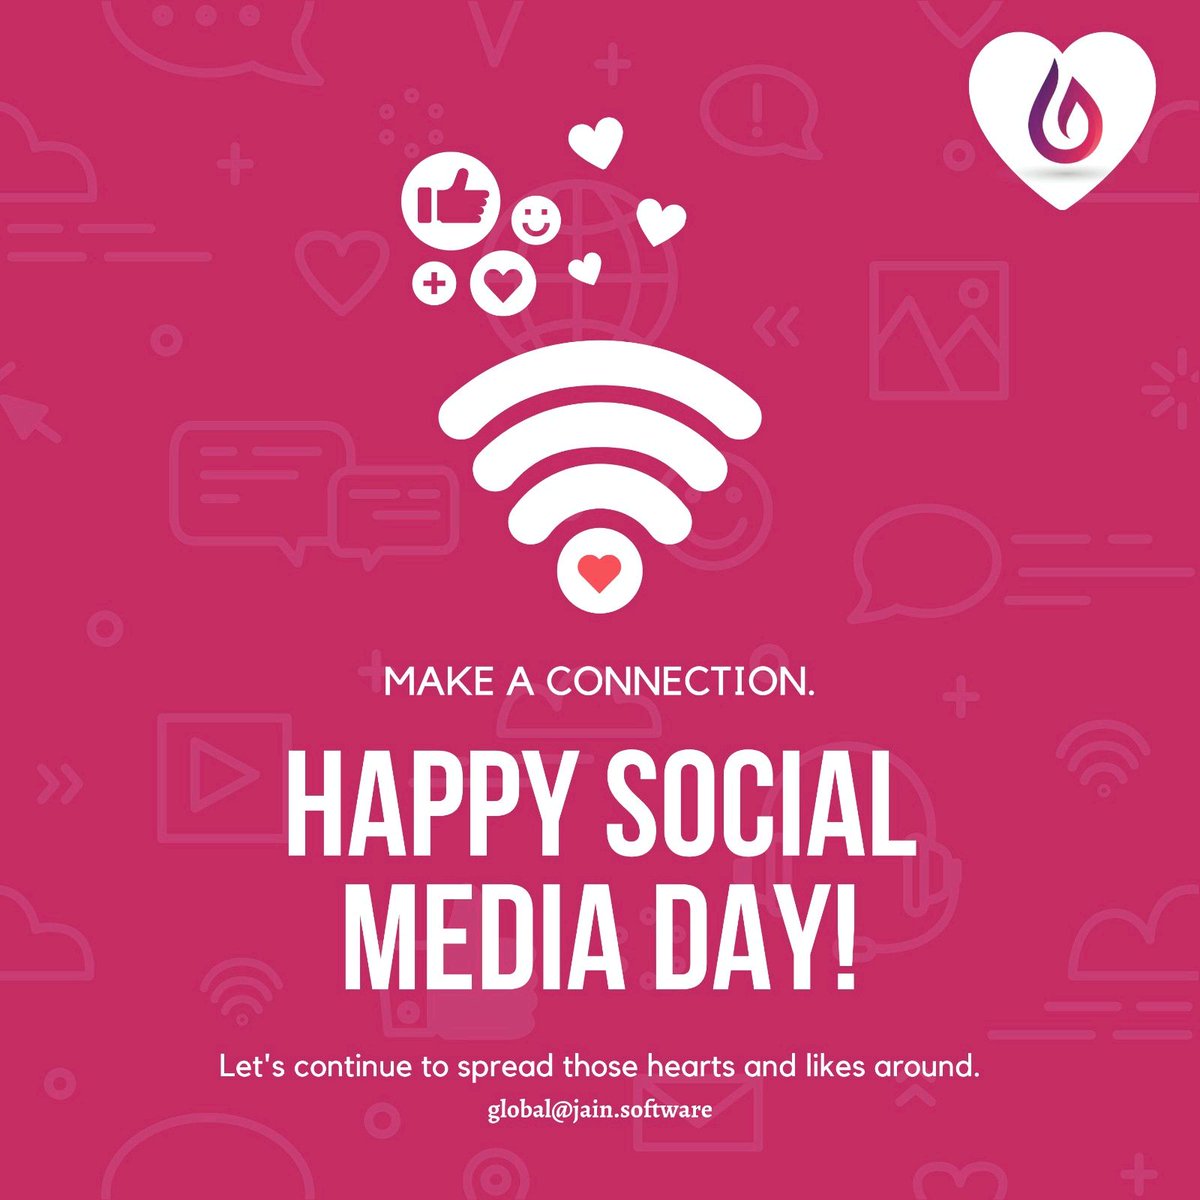 Happy social media day! 🎉📱🌍 Today, we celebrate the power of connection, sharing, and creativity that social media brings to our lives. Let's spread positivity, engage with one another, and use this platform to make a difference.❤️🙌
#HappySocialMediaDay #ConnectAndInspire